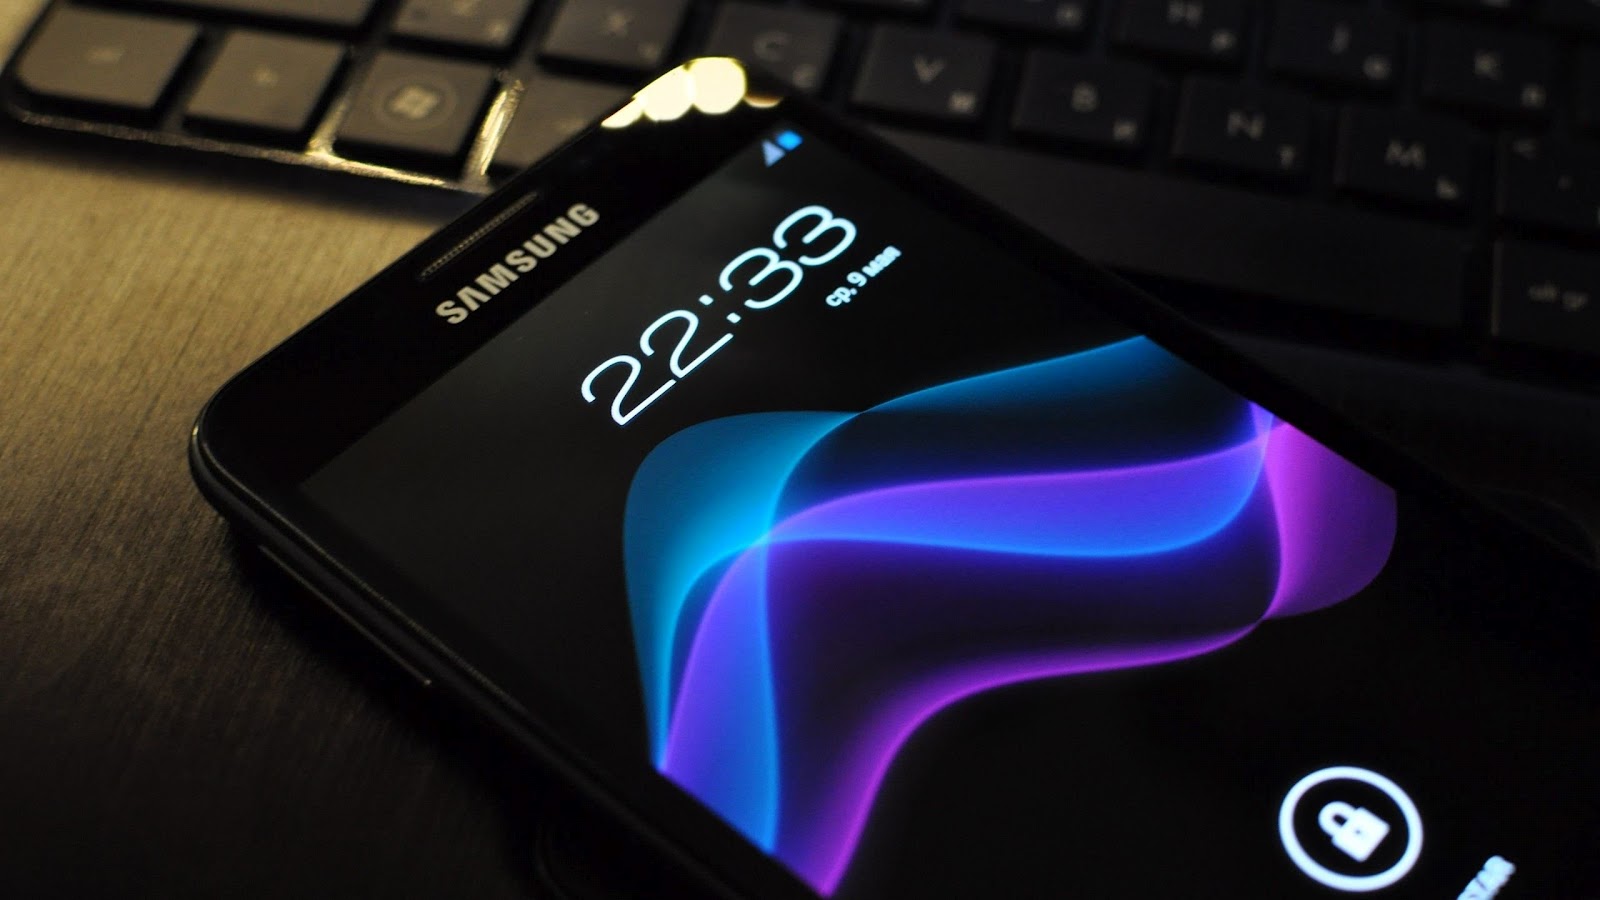 Androids Wall: Free HD Wallpapers for Samsung Note